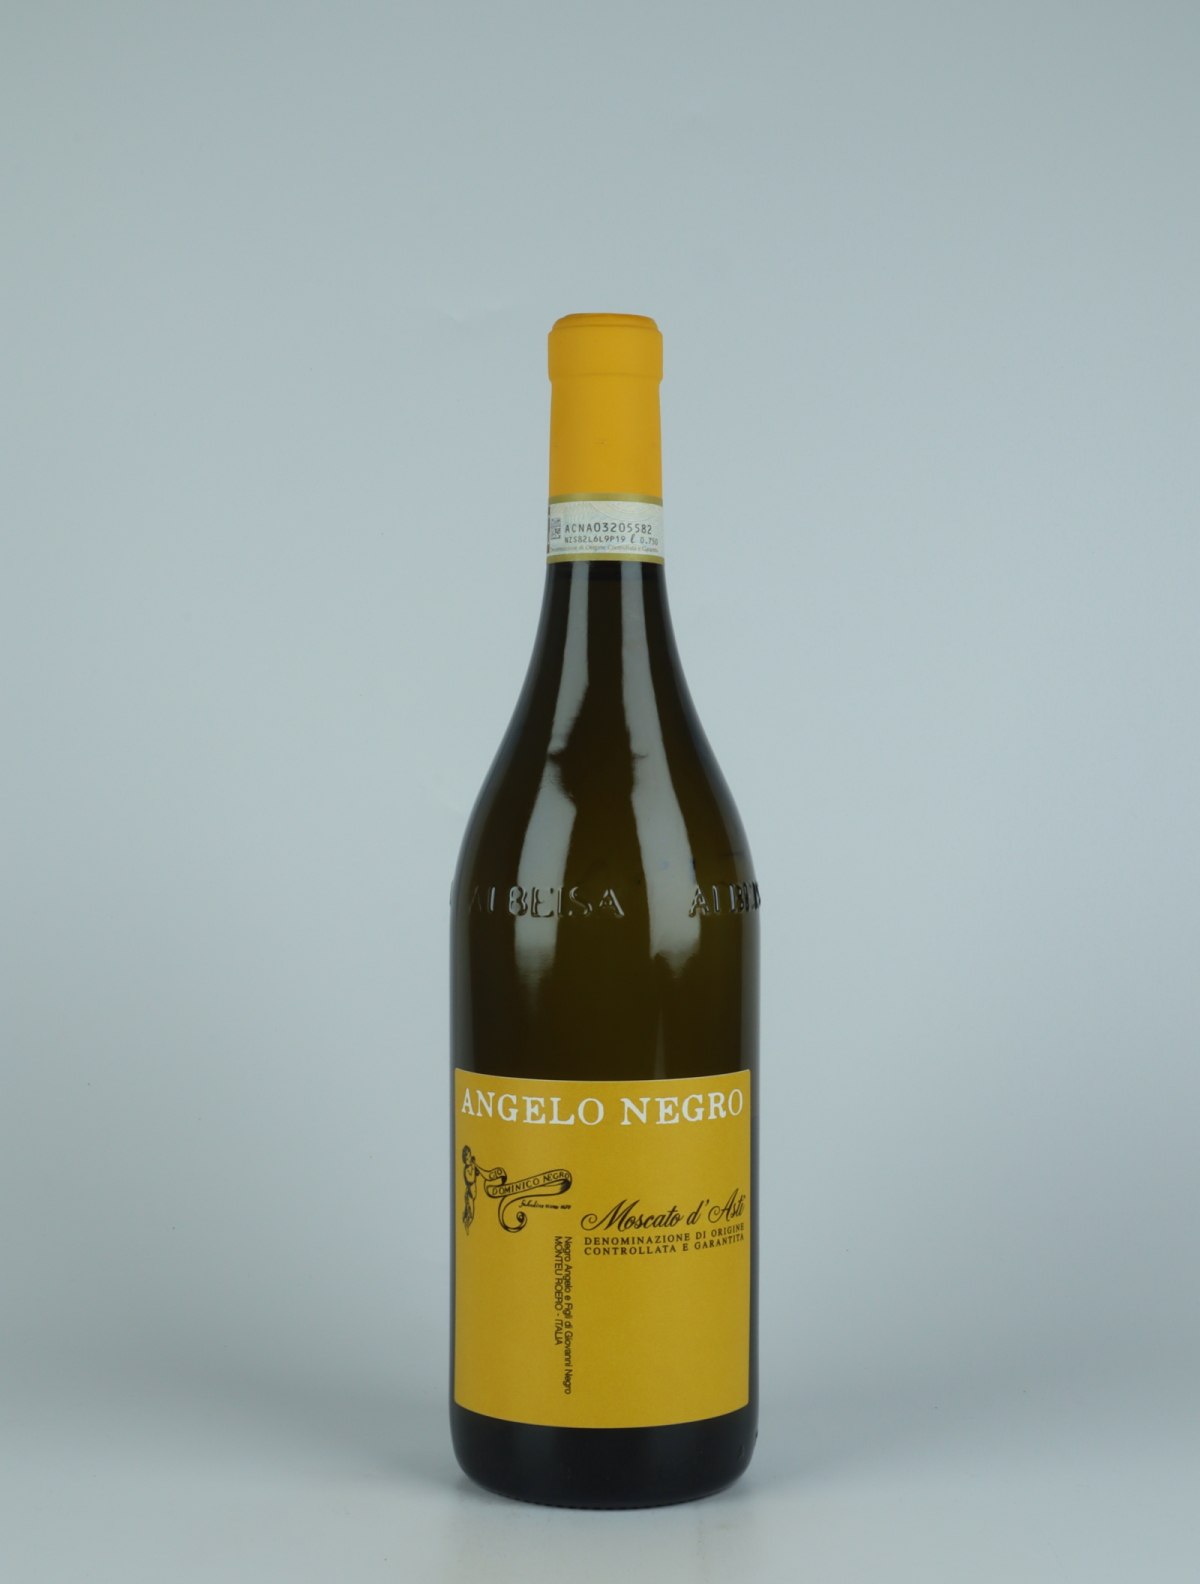 A bottle 2021 Moscato d'Asti Sweet wine from Angelo Negro, Piedmont in Italy